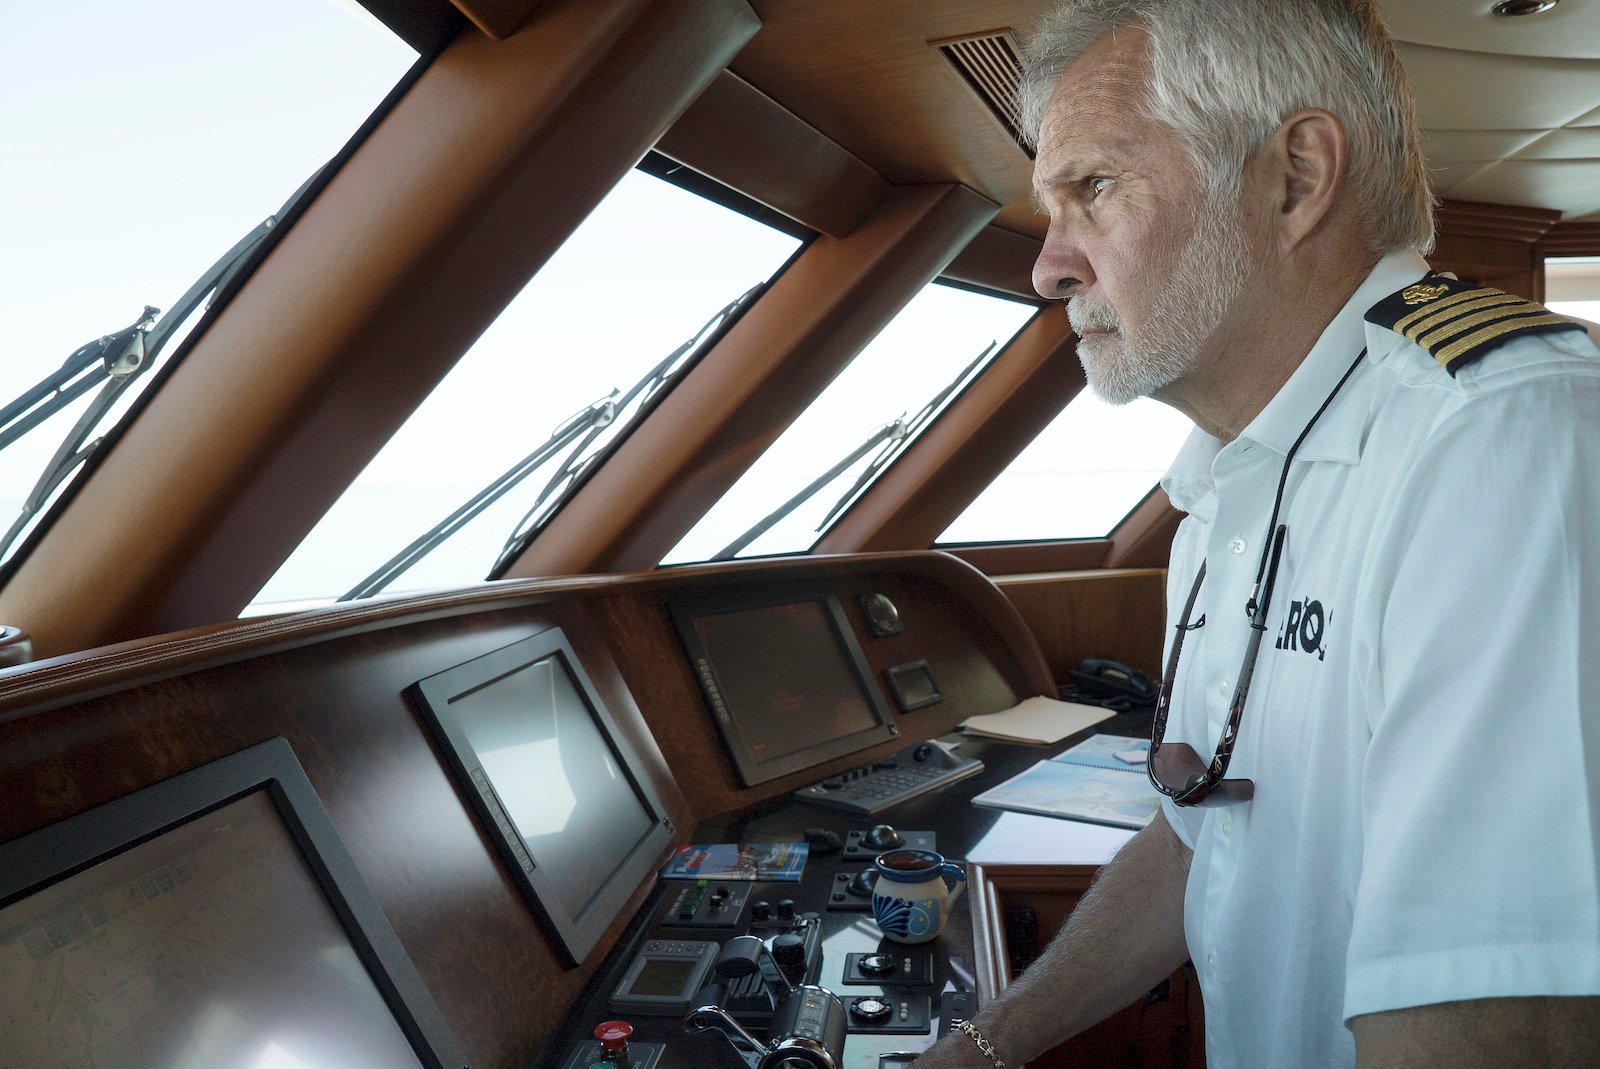 Captain Lee Rosbach from Below Deck said he has relived that final morning with his son since his death in 2019